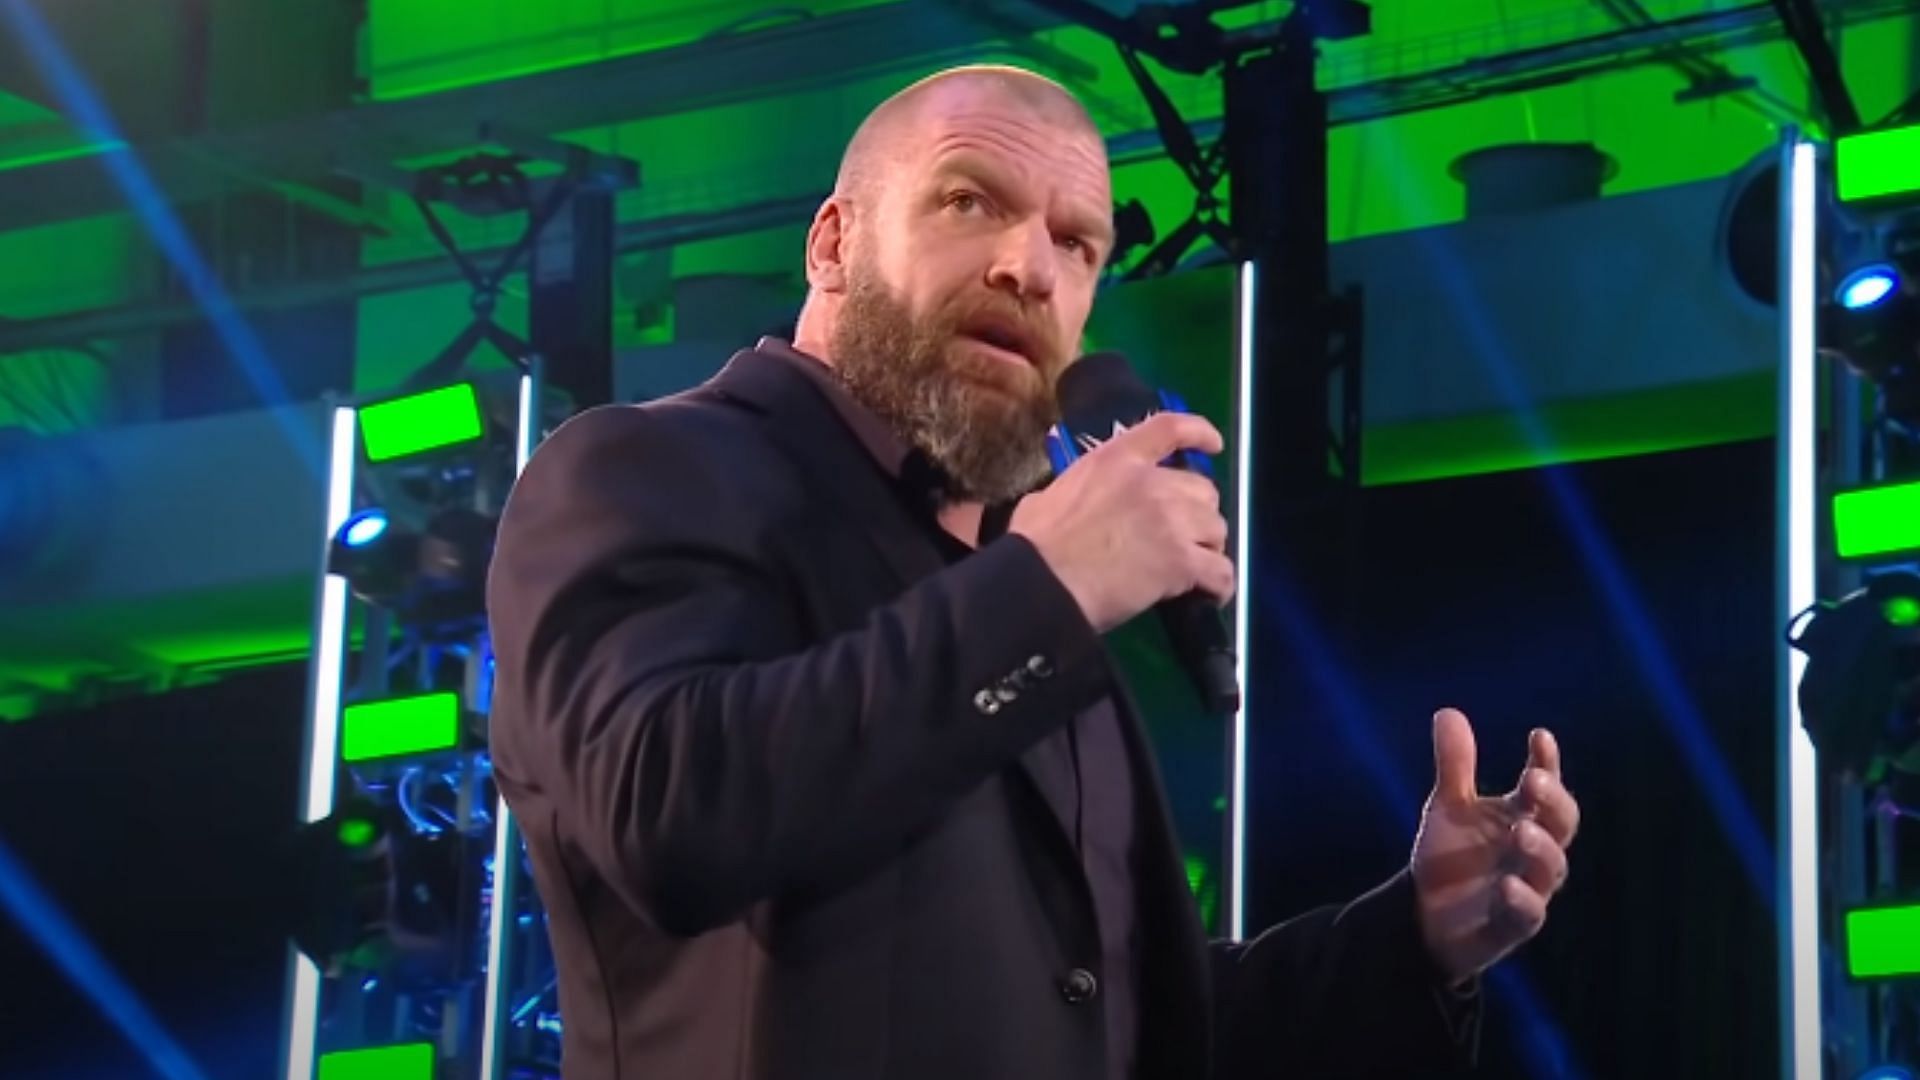 Triple H is a WWE executive and 14-time world champion.